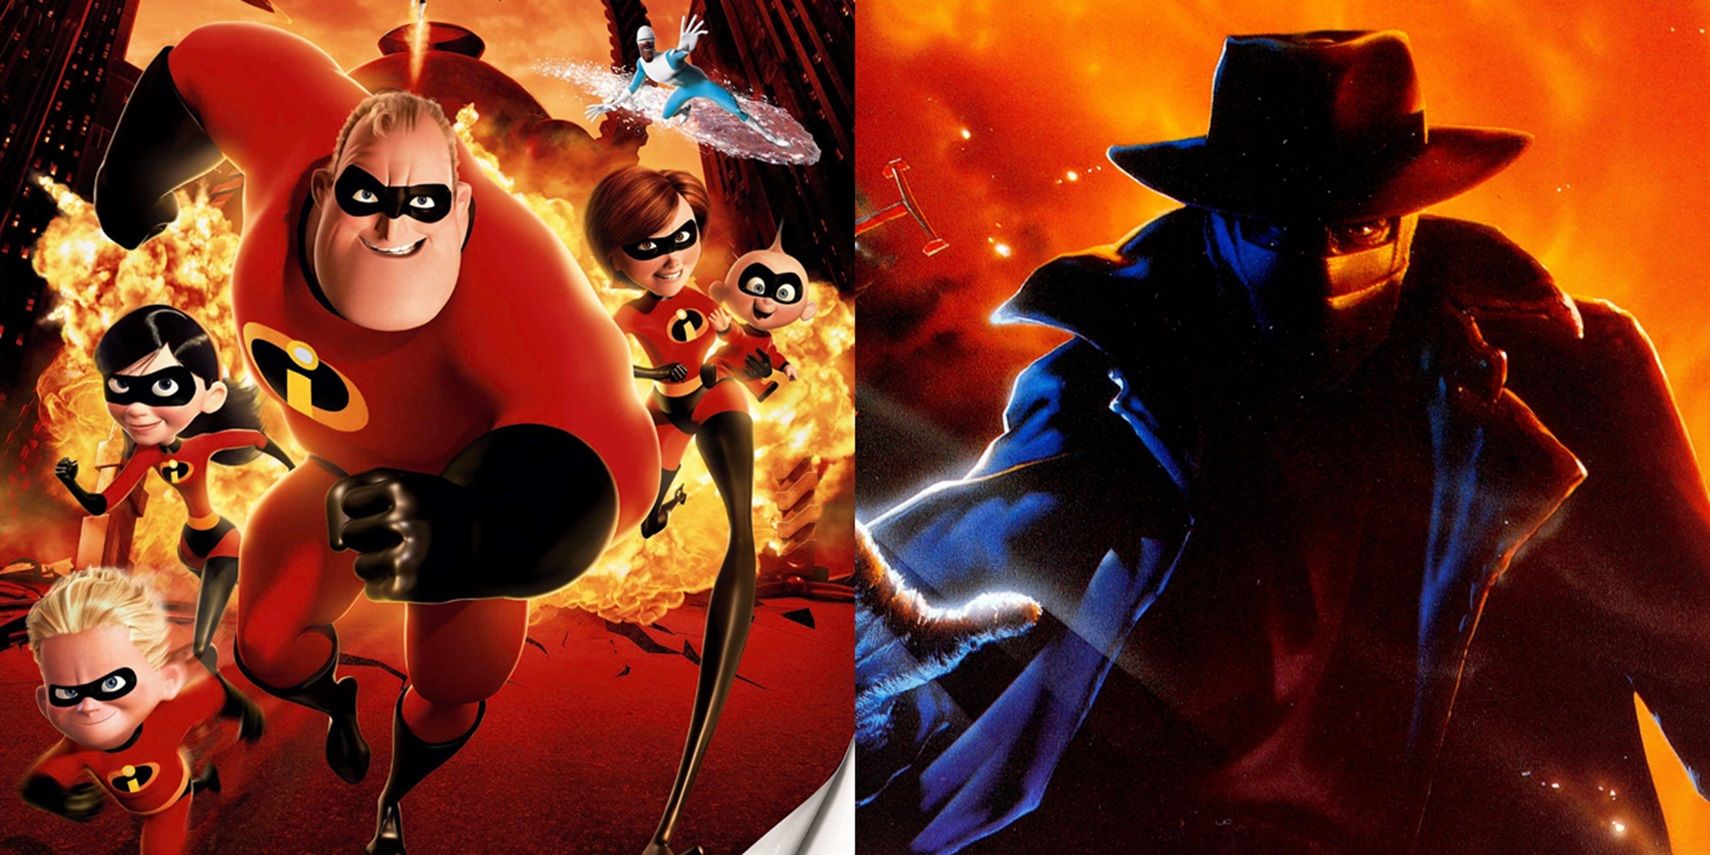 The Incredibles and Darkman